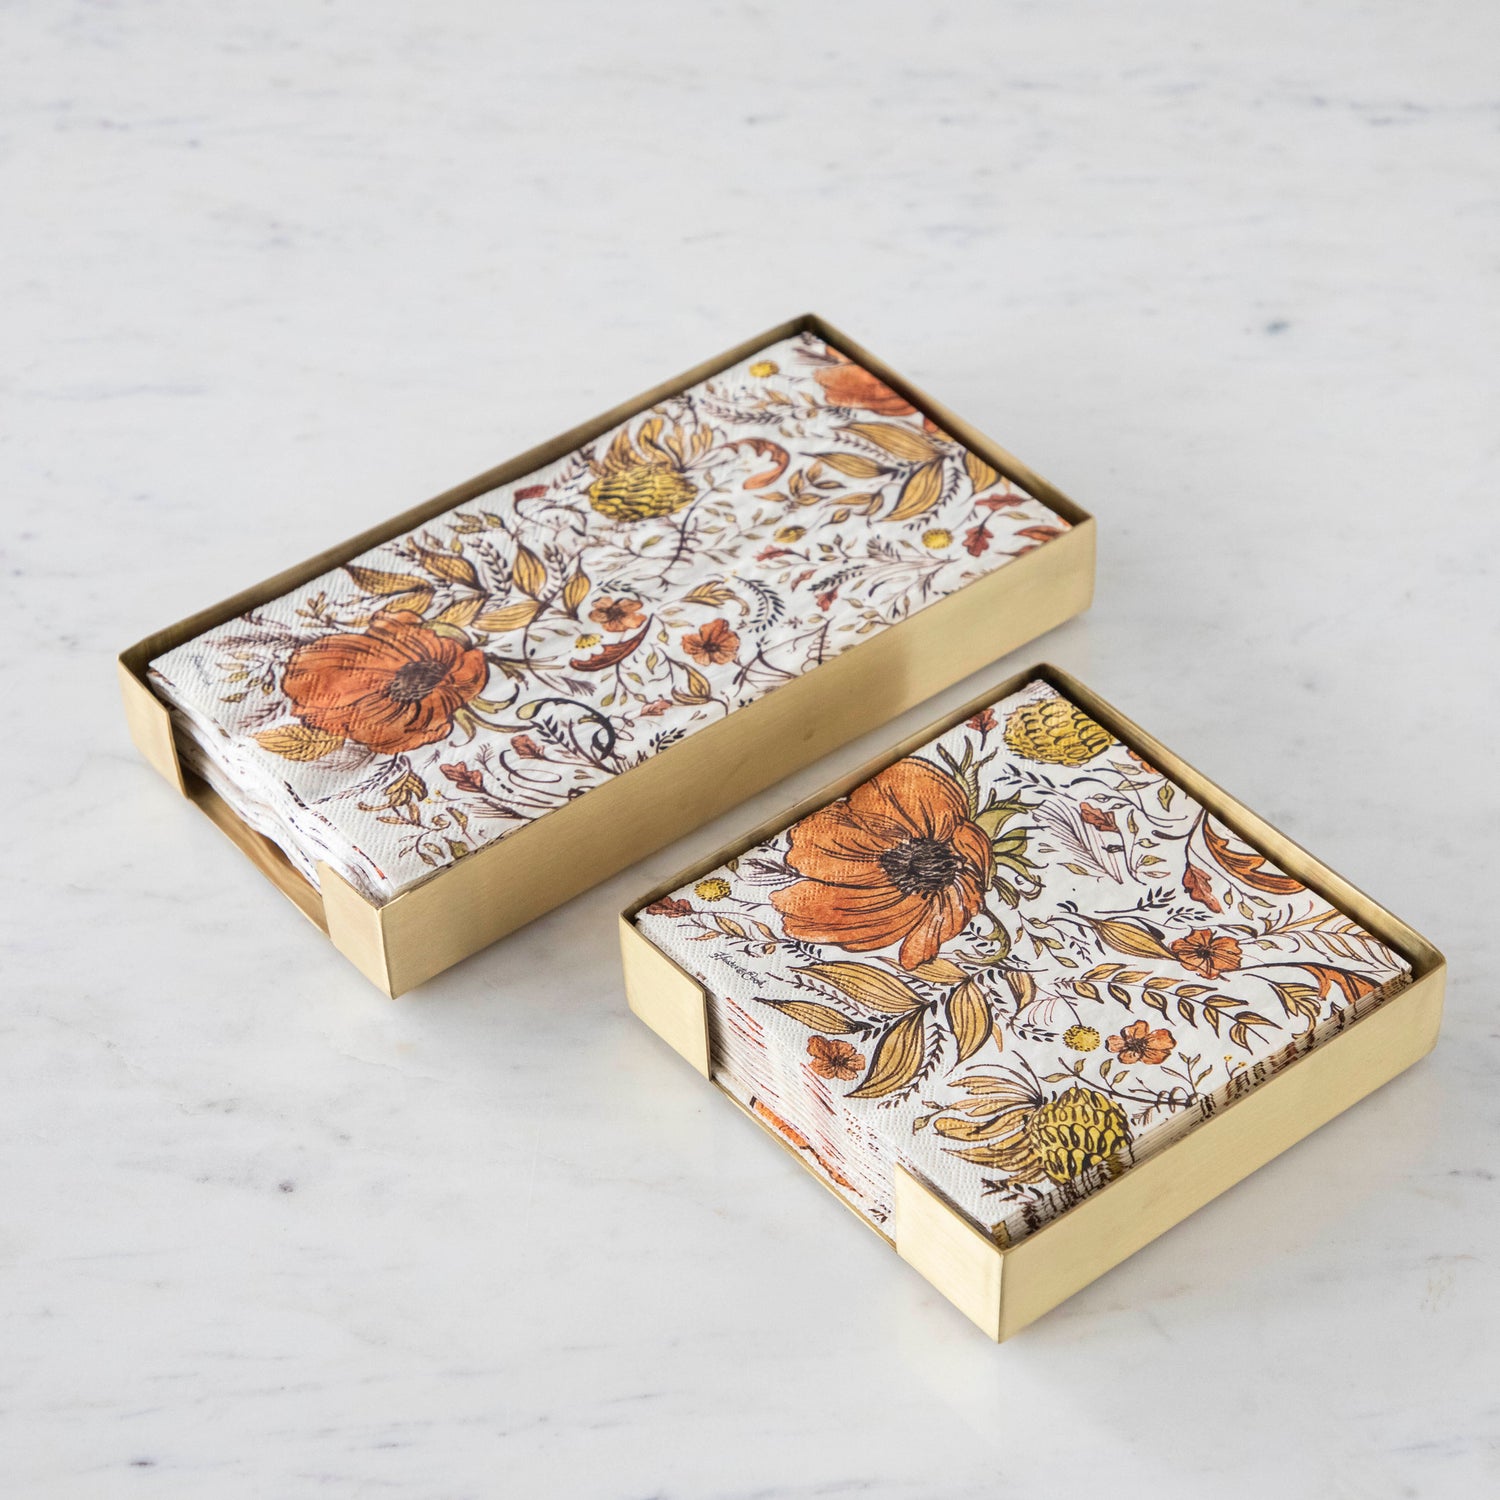 A set of Hester &amp; Cook Brass Napkin Holders with a floral pattern, adding sophistication to any table setting.